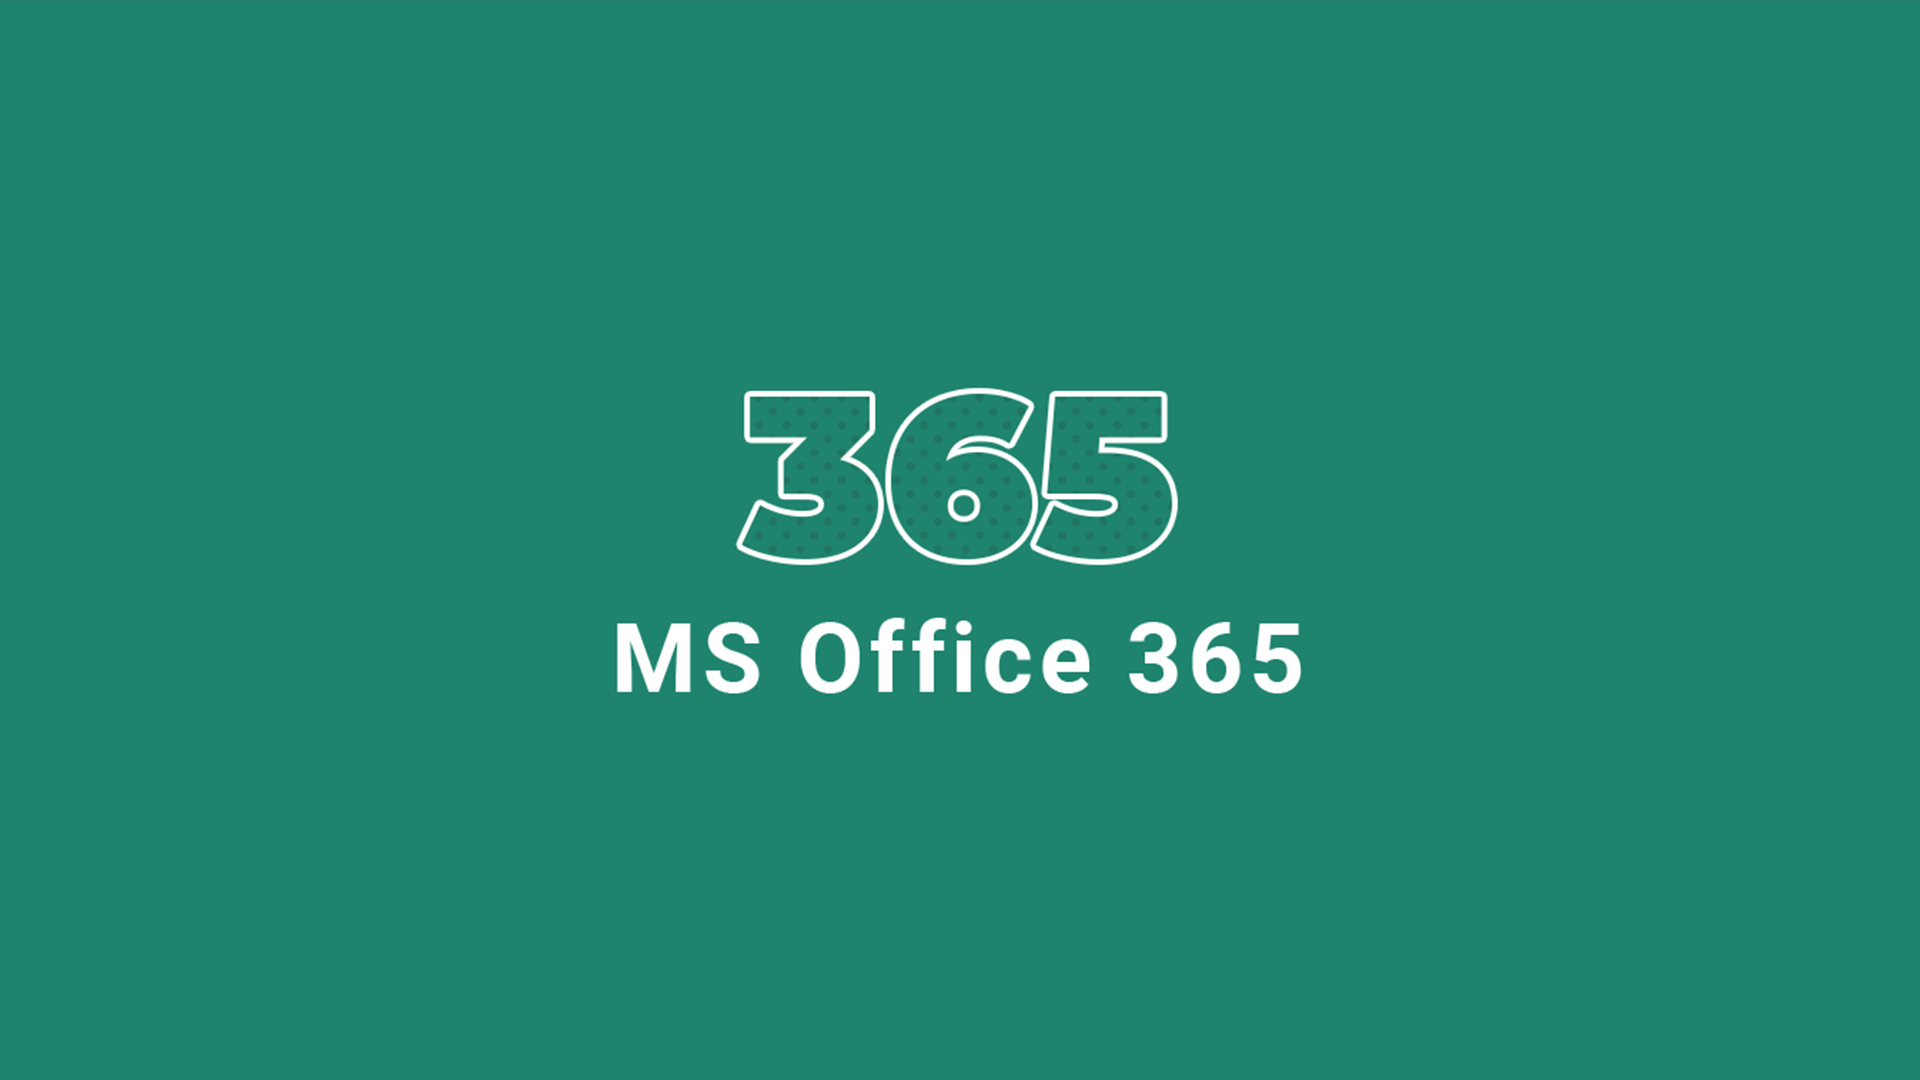 MS Office 365 Family Key (6 Months / 6 Devices), 56.49 usd